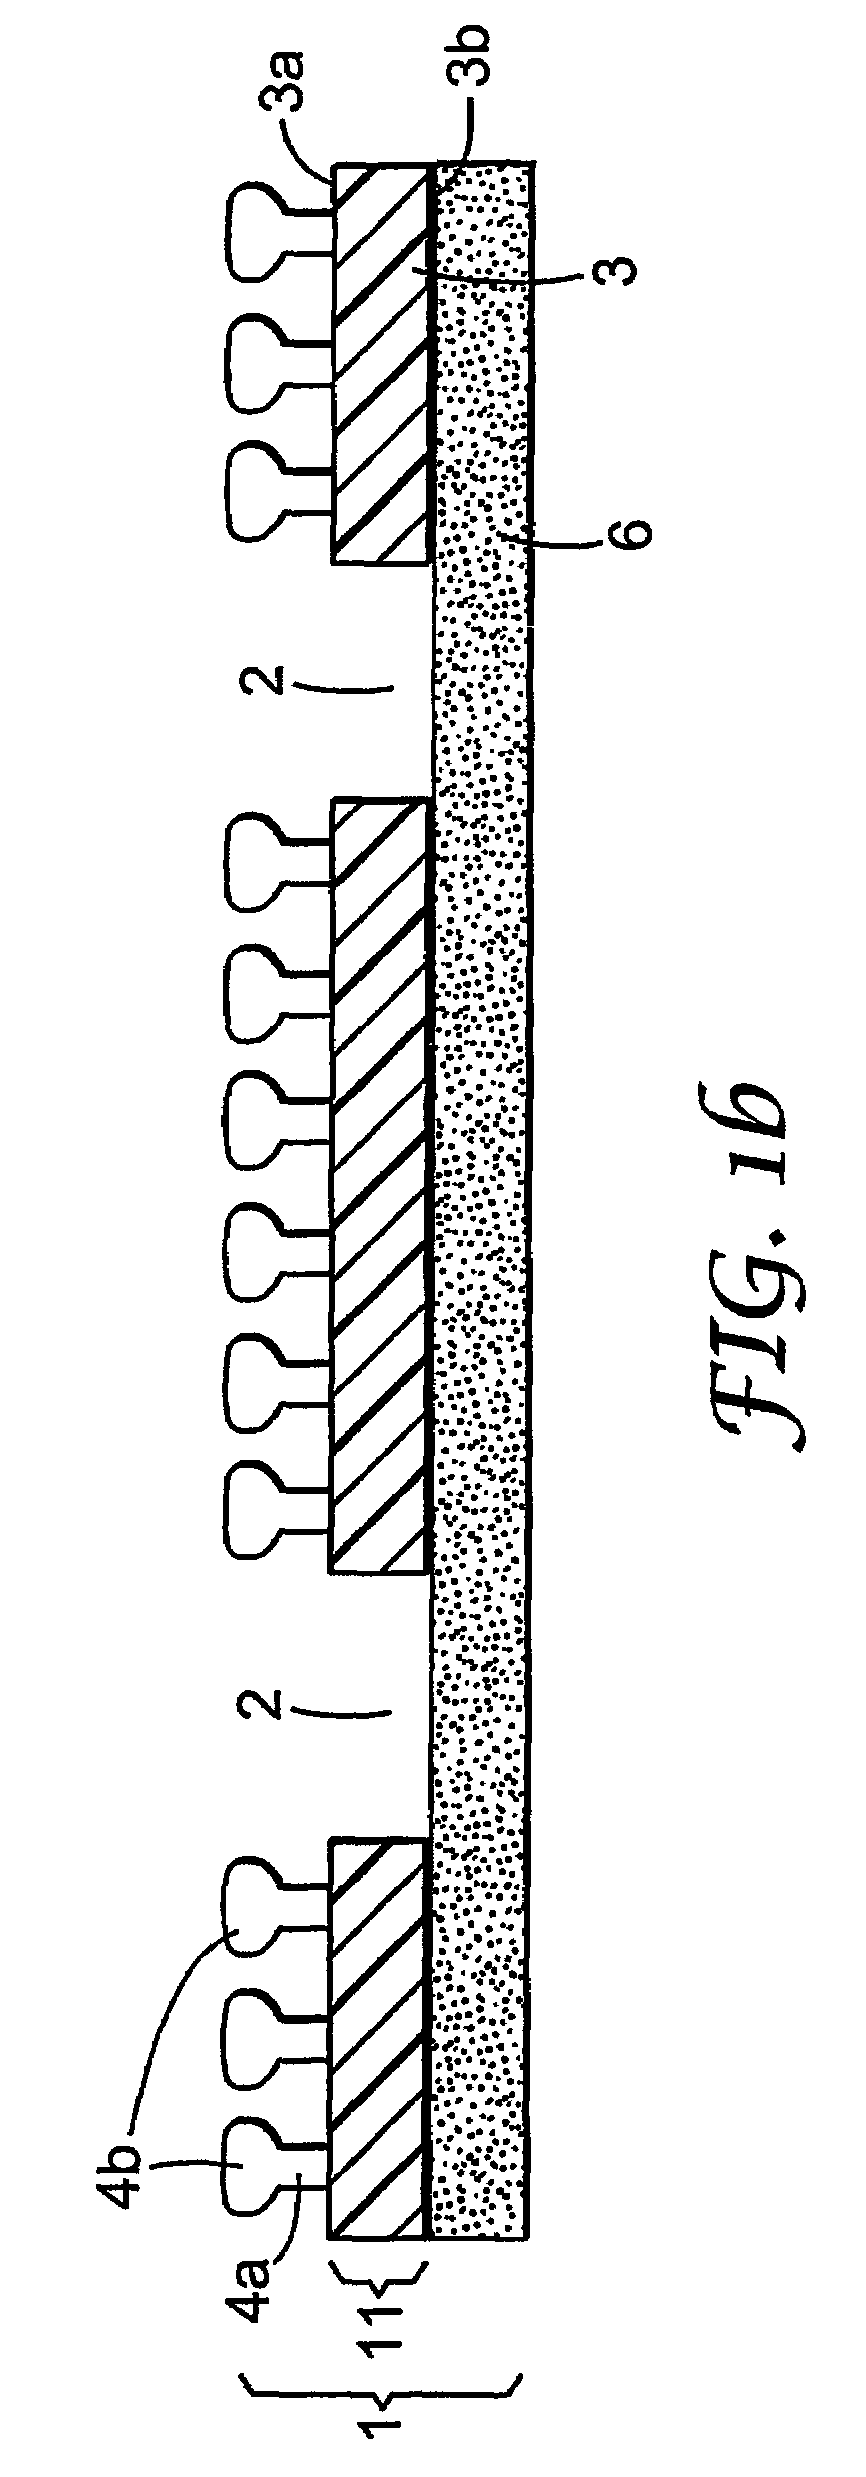 Fastening film system and assembly comprising a fastening film system and a substrate